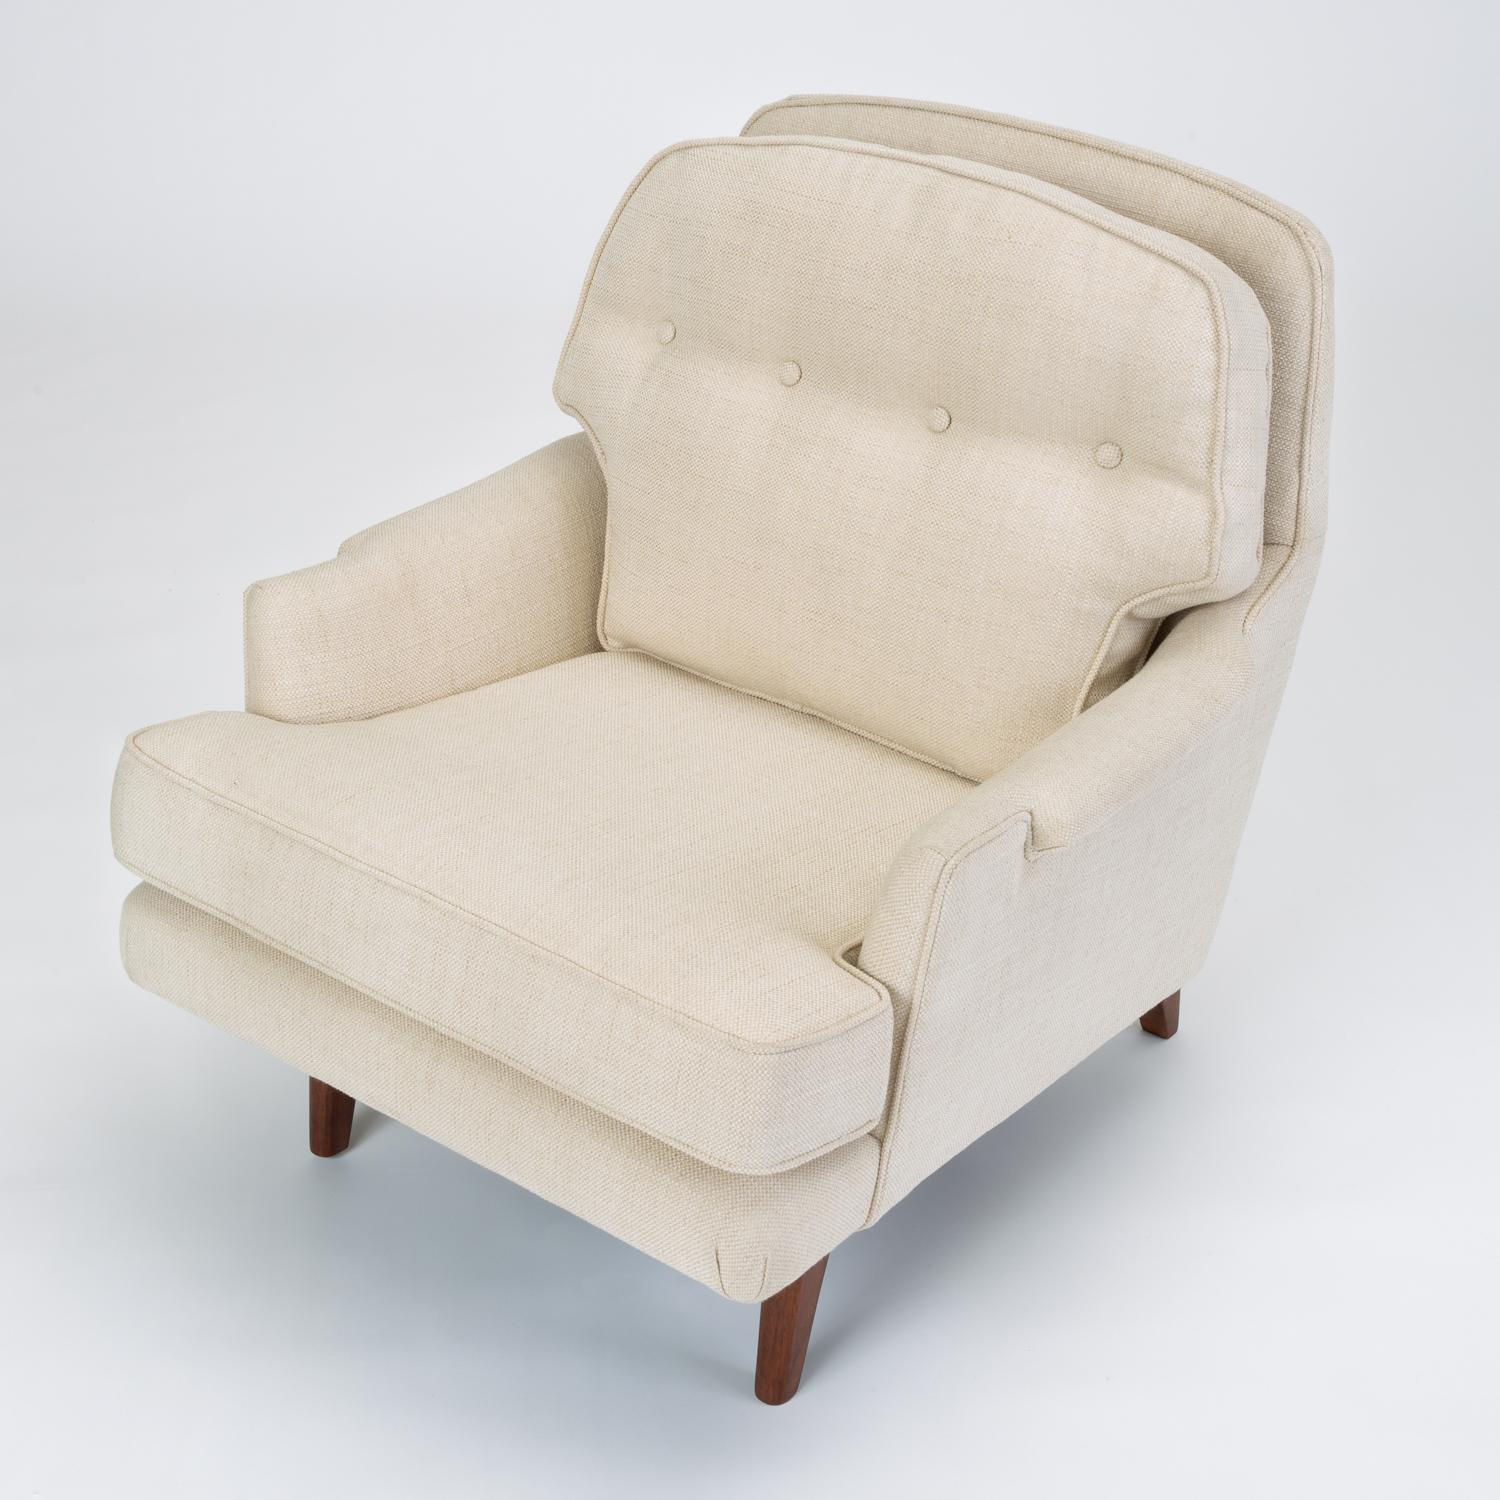 Stained Lounge Chair with Bracket Base by Roger Sprunger for Dunbar